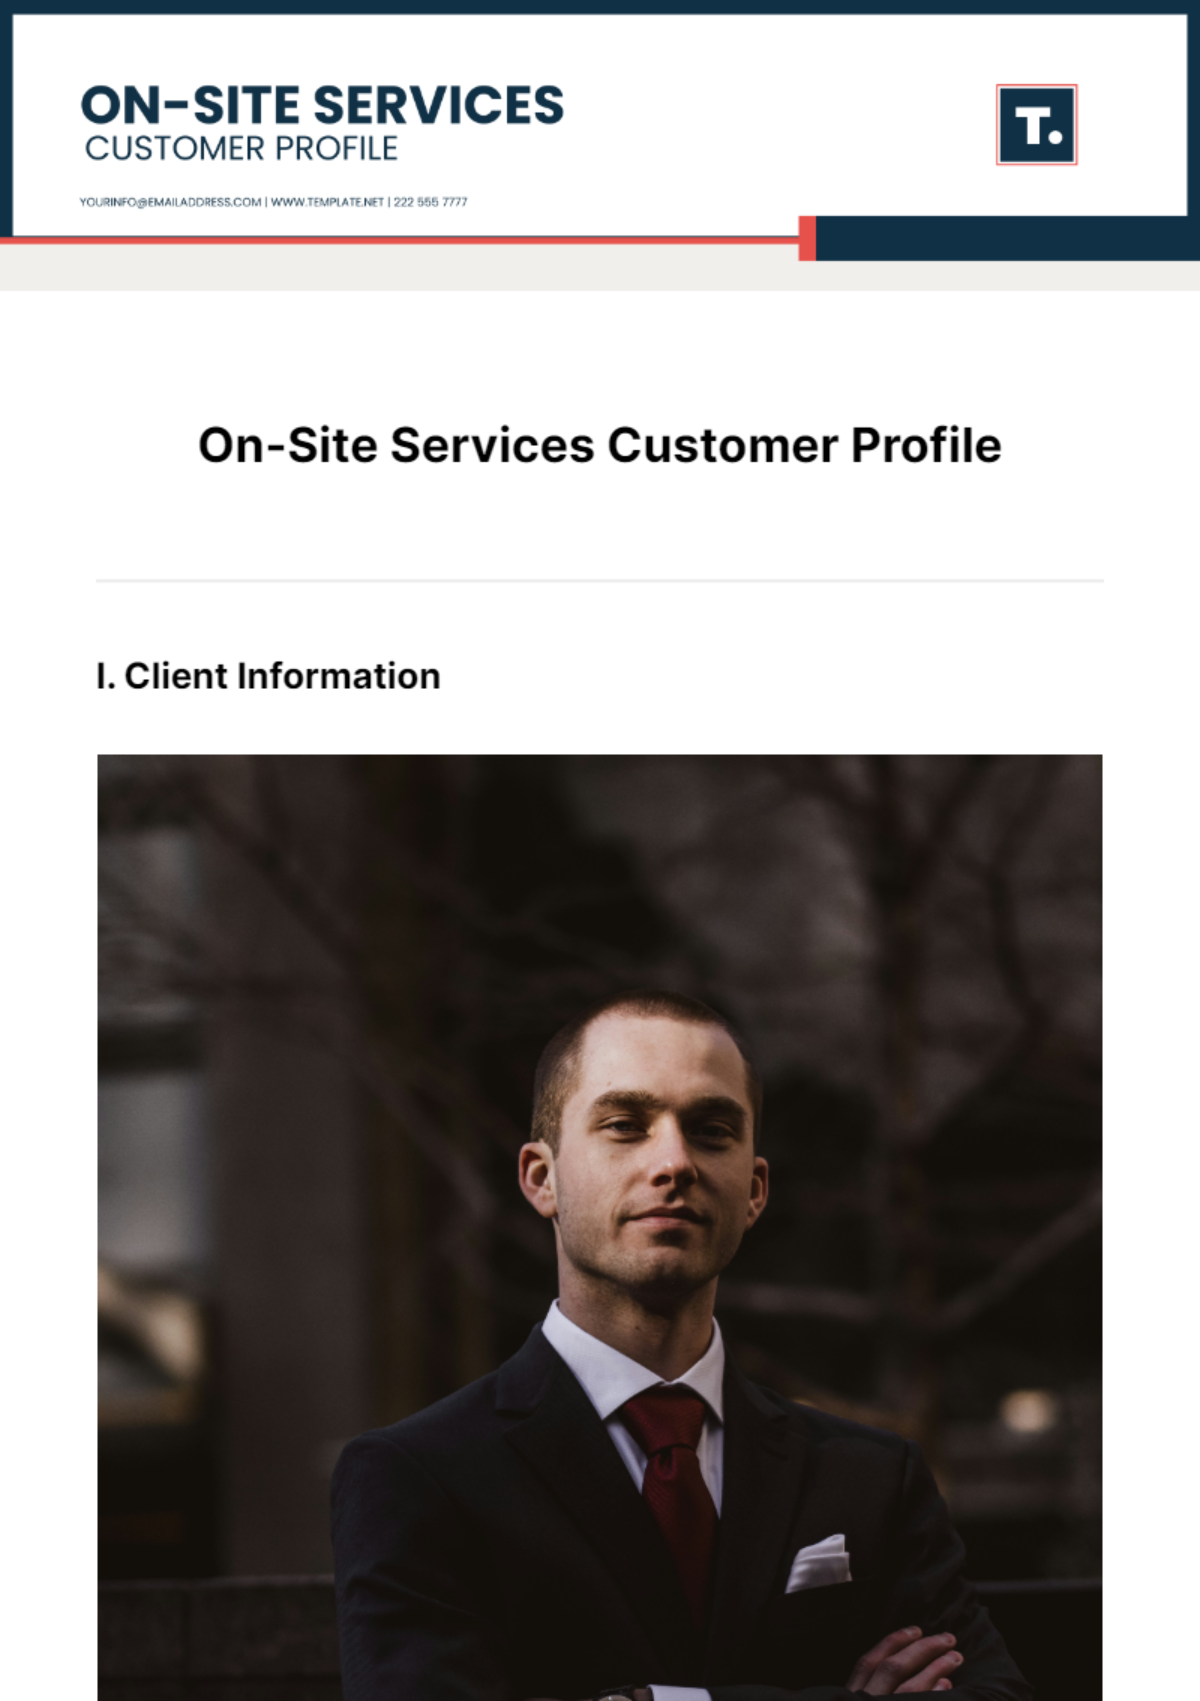 On-Site Services Customer Profile Template